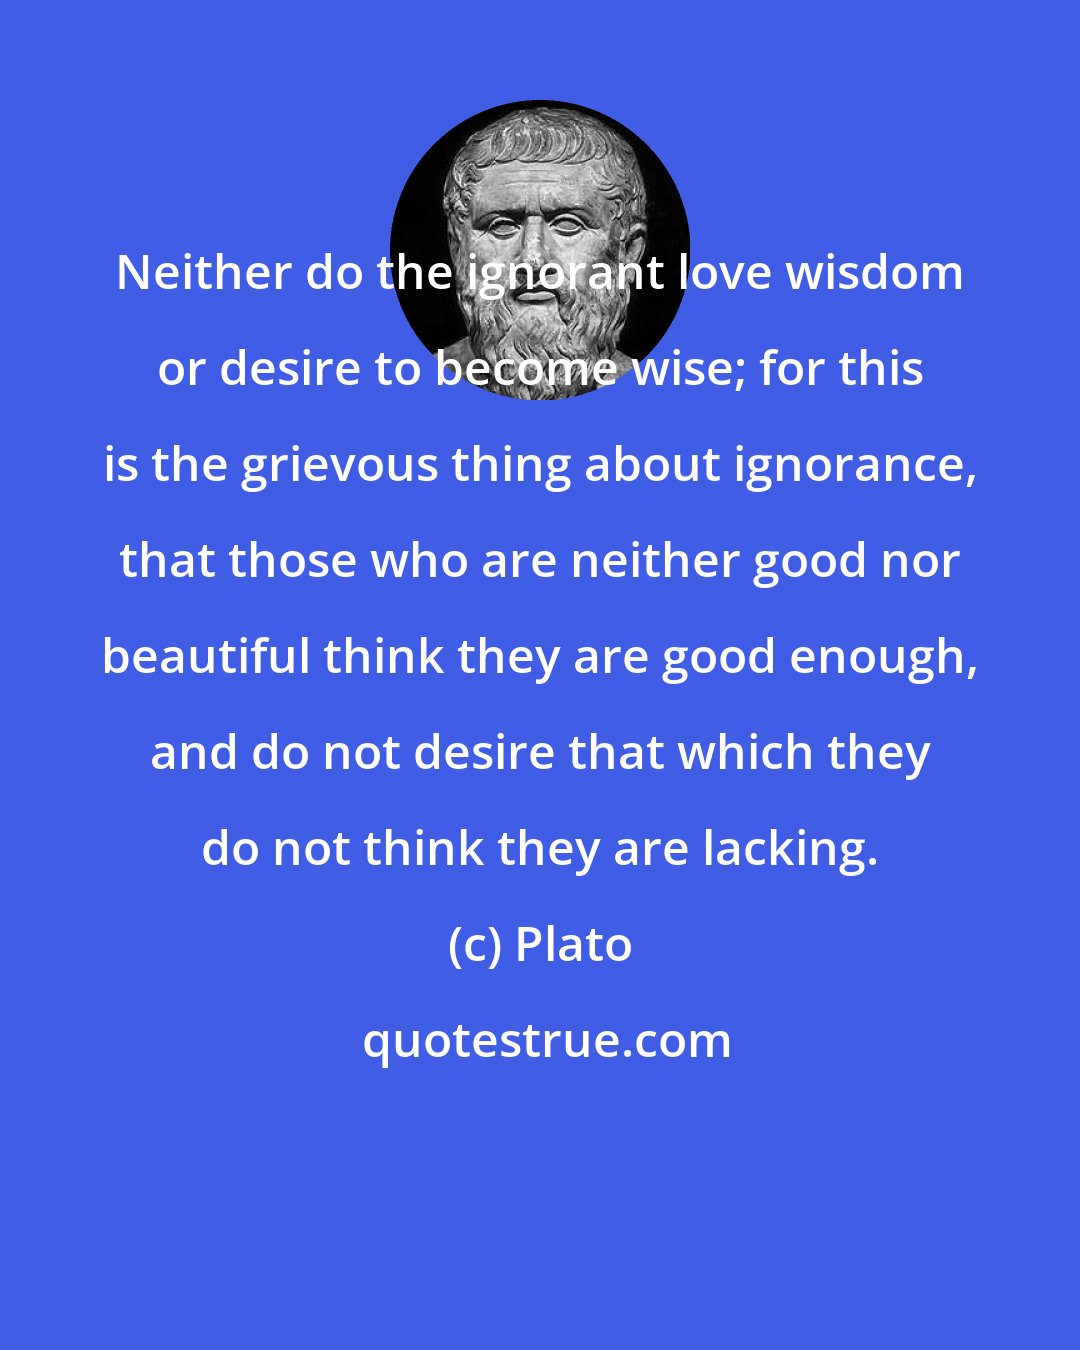 Plato: Neither do the ignorant love wisdom or desire to become wise; for this is the grievous thing about ignorance, that those who are neither good nor beautiful think they are good enough, and do not desire that which they do not think they are lacking.